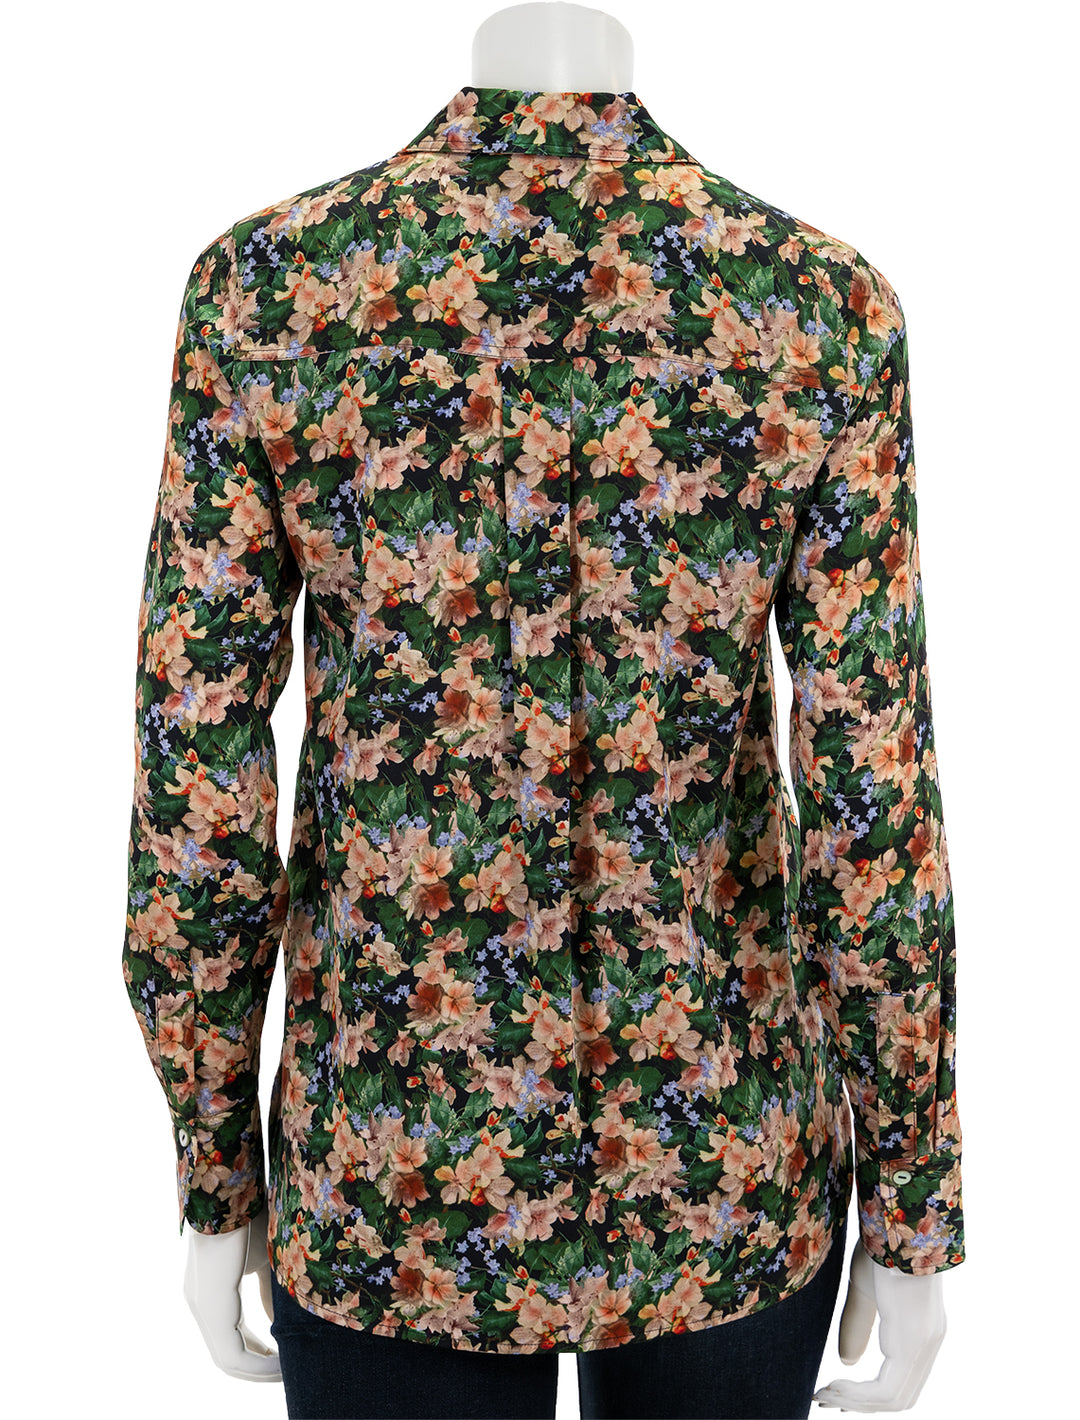 Back view of Vince's wild primrose slim fitted blouse.